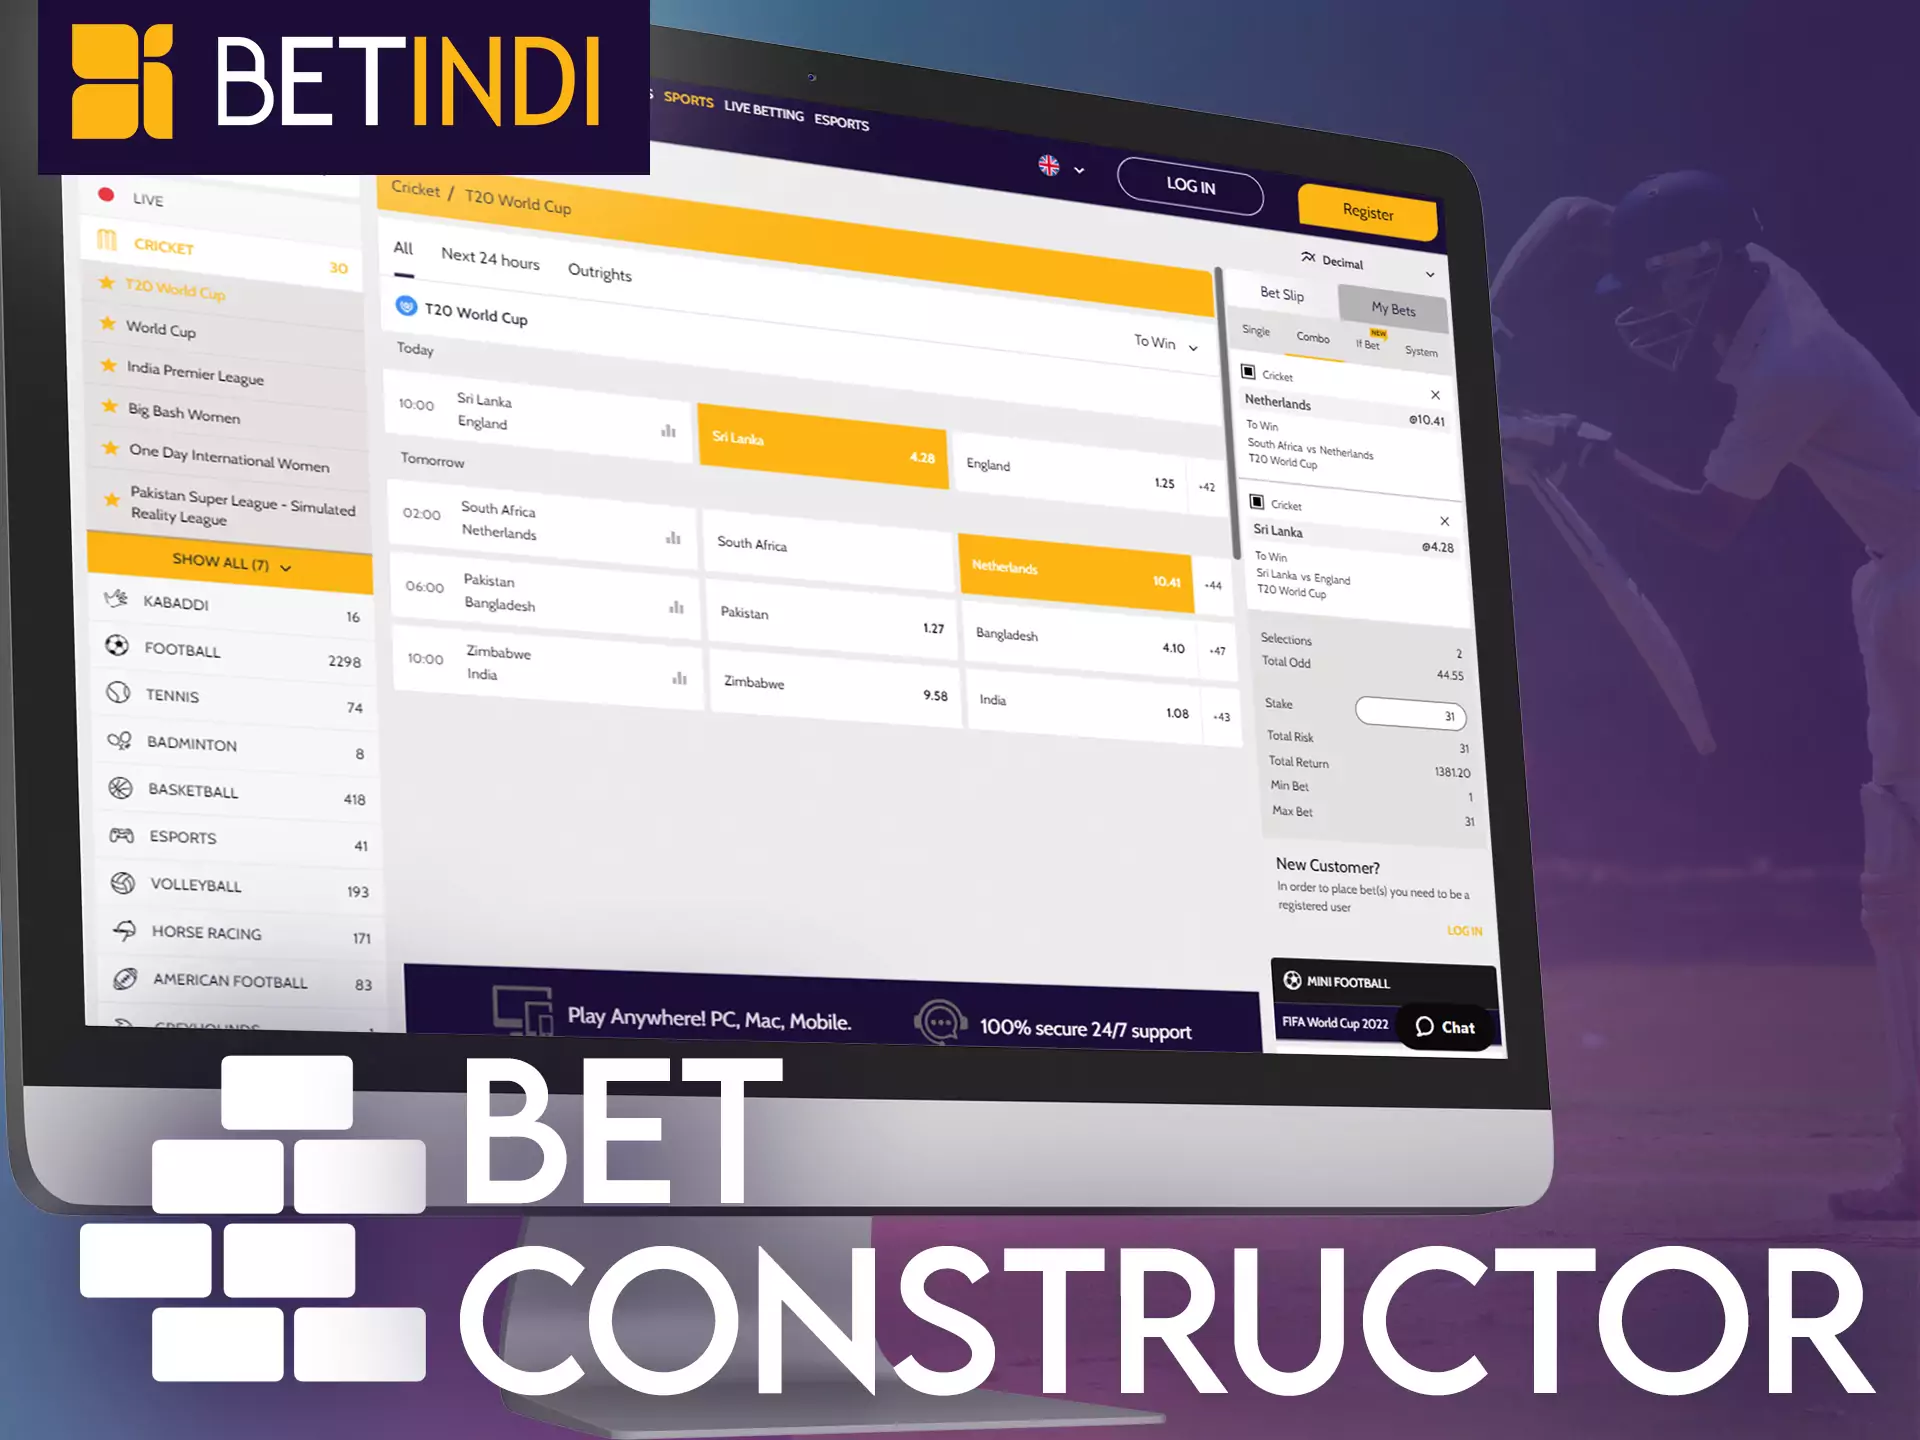 Try the constructor for betting on Betindi.